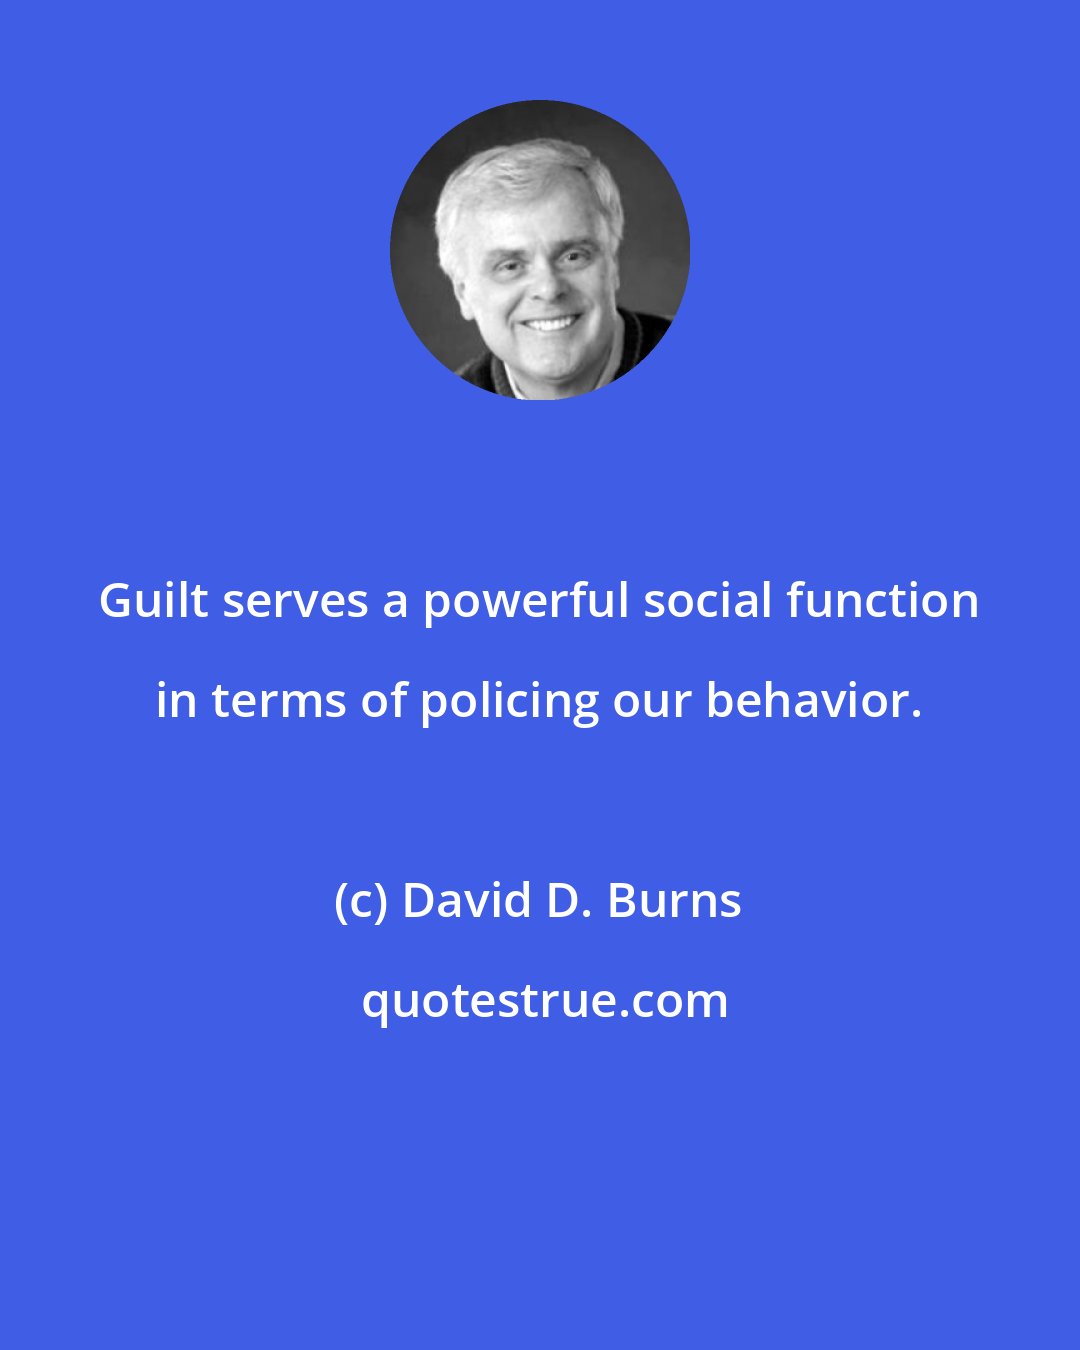 David D. Burns: Guilt serves a powerful social function in terms of policing our behavior.